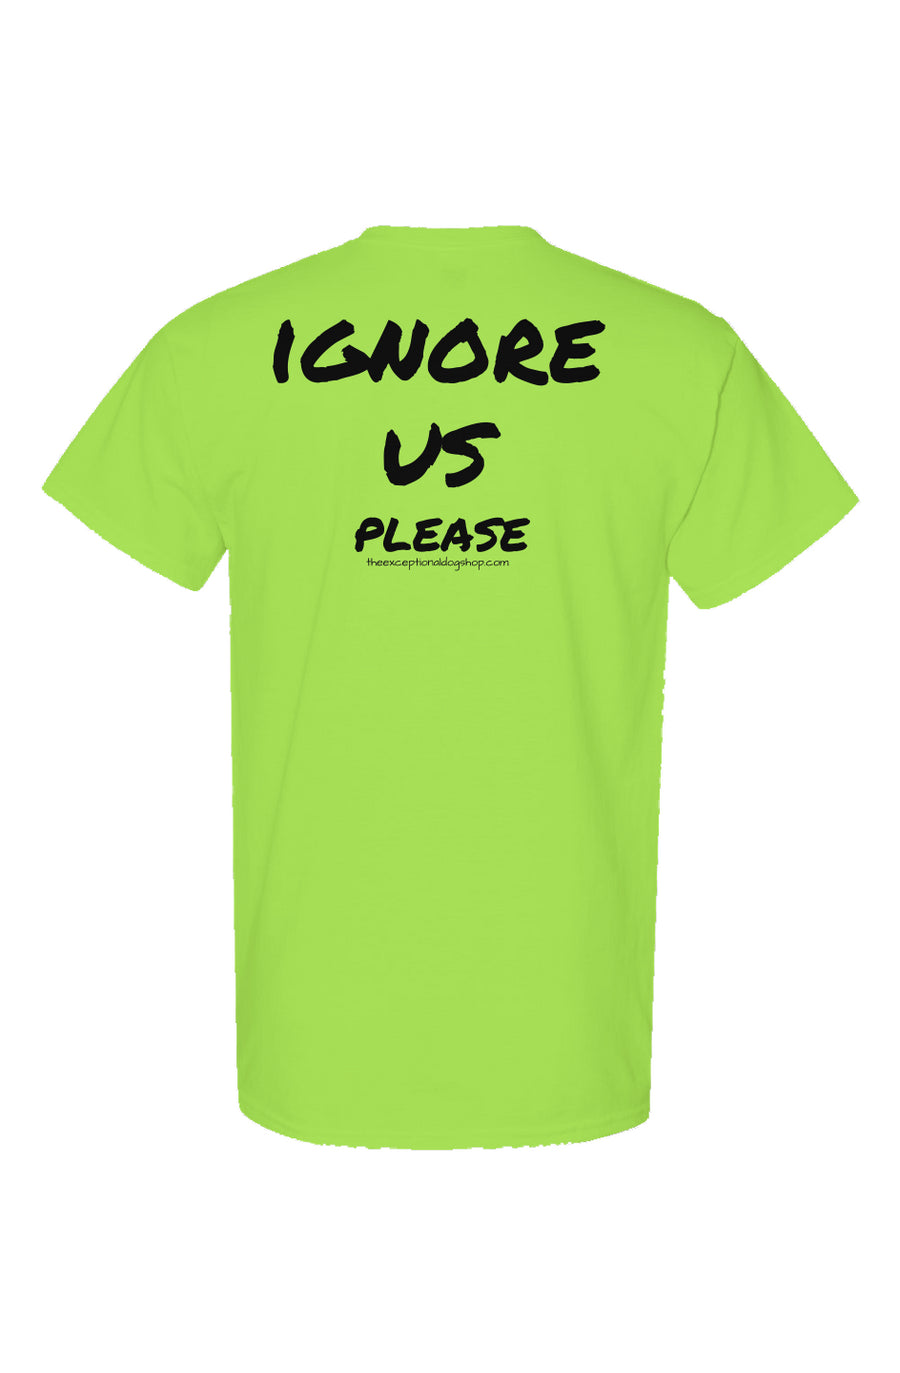 High visibility neon yellow training t shirt with the text ignore us please in large lettering on the front of the shirt.